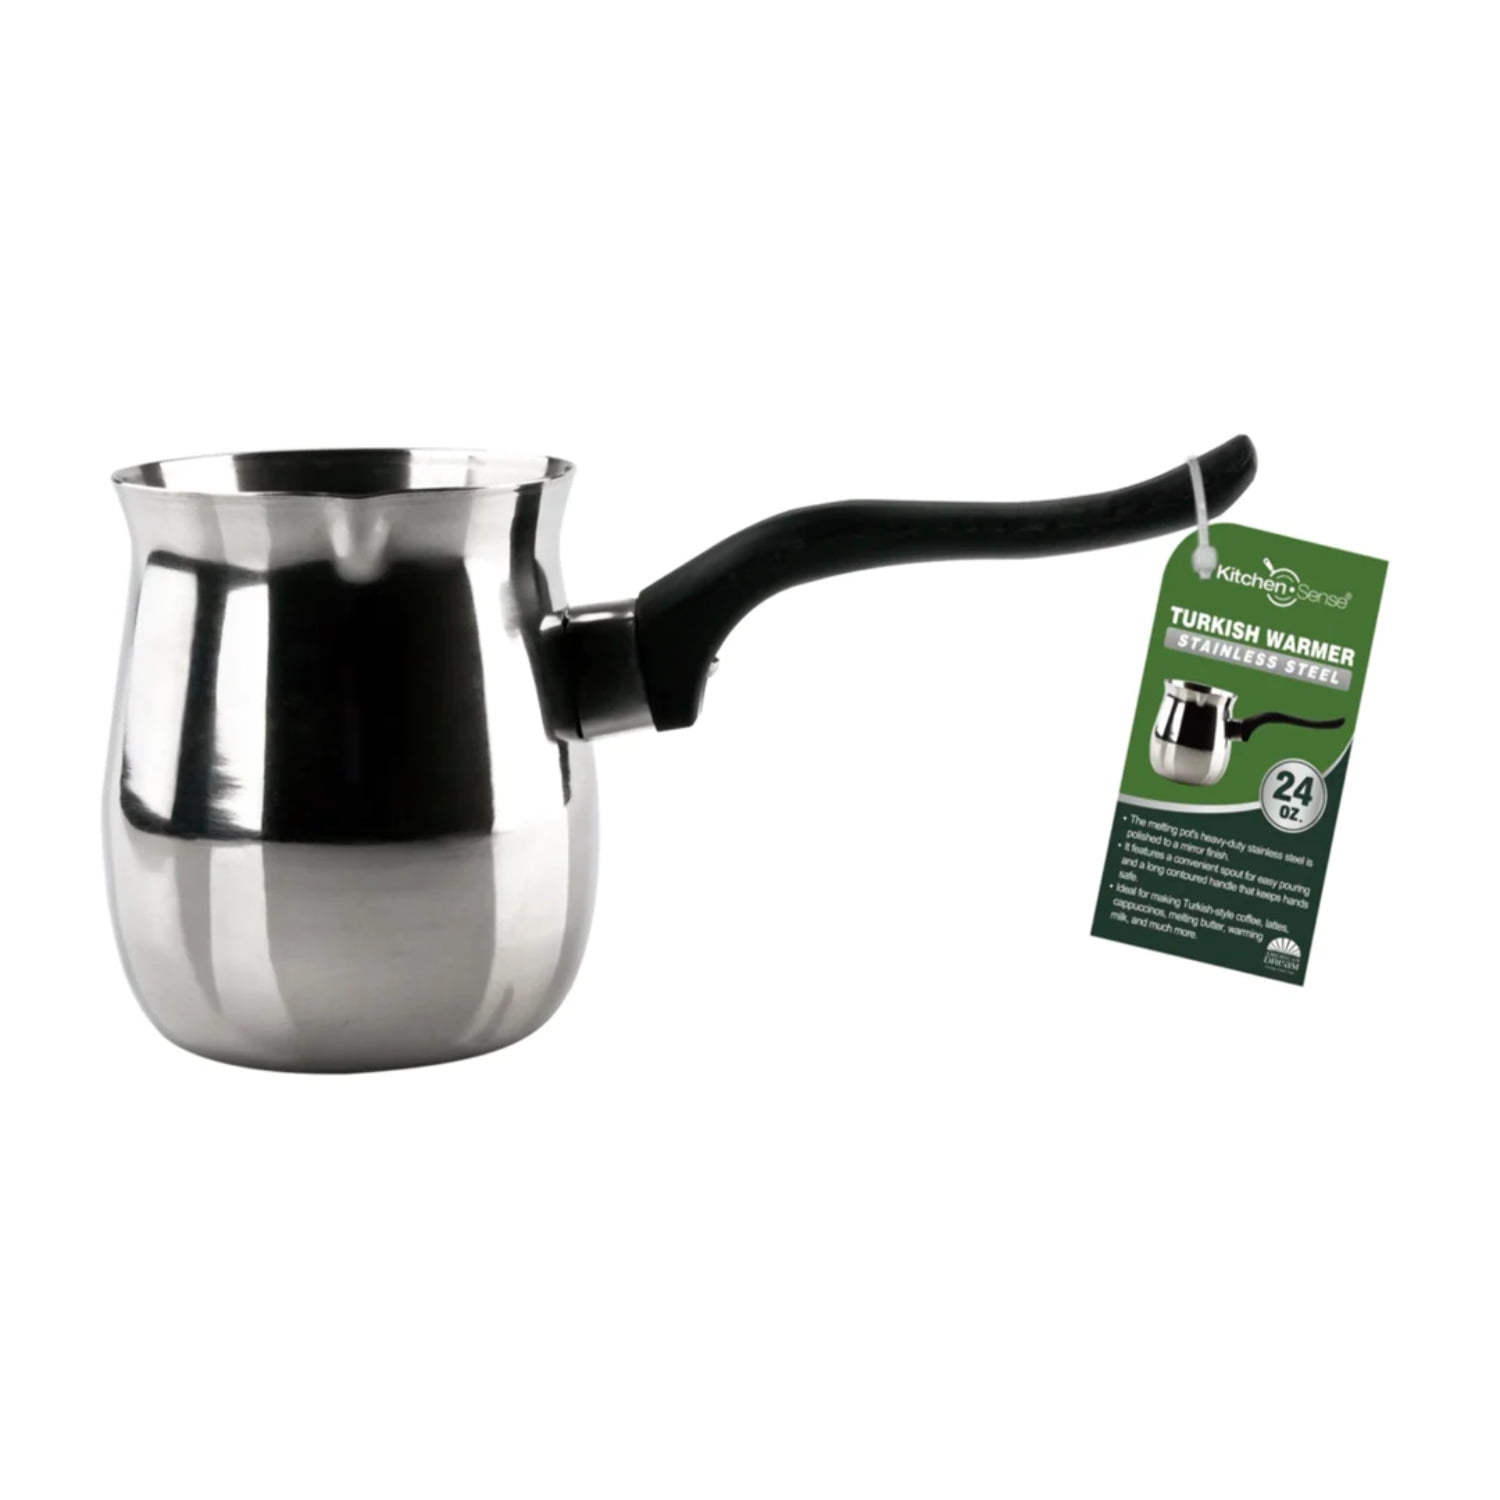 Alpine Cuisine Stainless Steel Coffee Warmer, 31oz with Ergonomic Hanging  Handle - Turkish and Greek Coffee Maker, Butter Warmer, and Milk Pot for